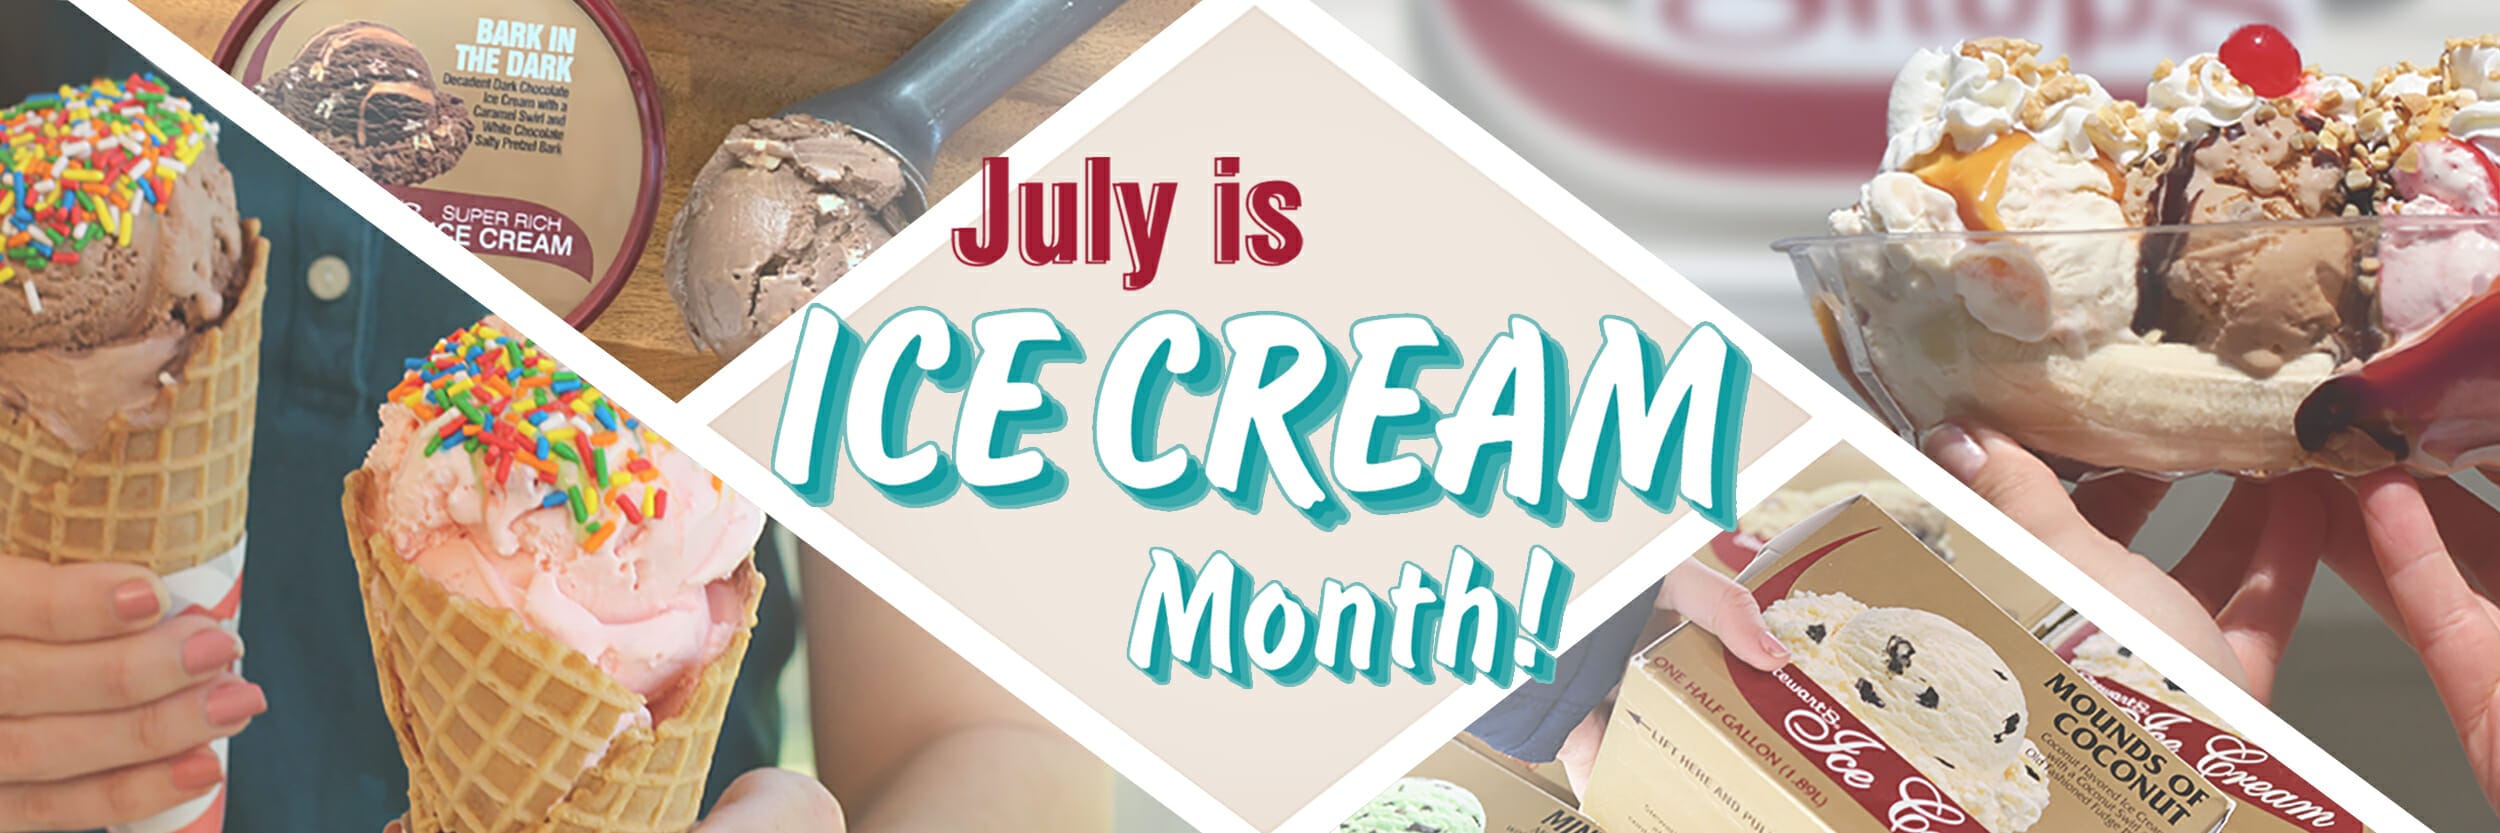 July is ice cream month!